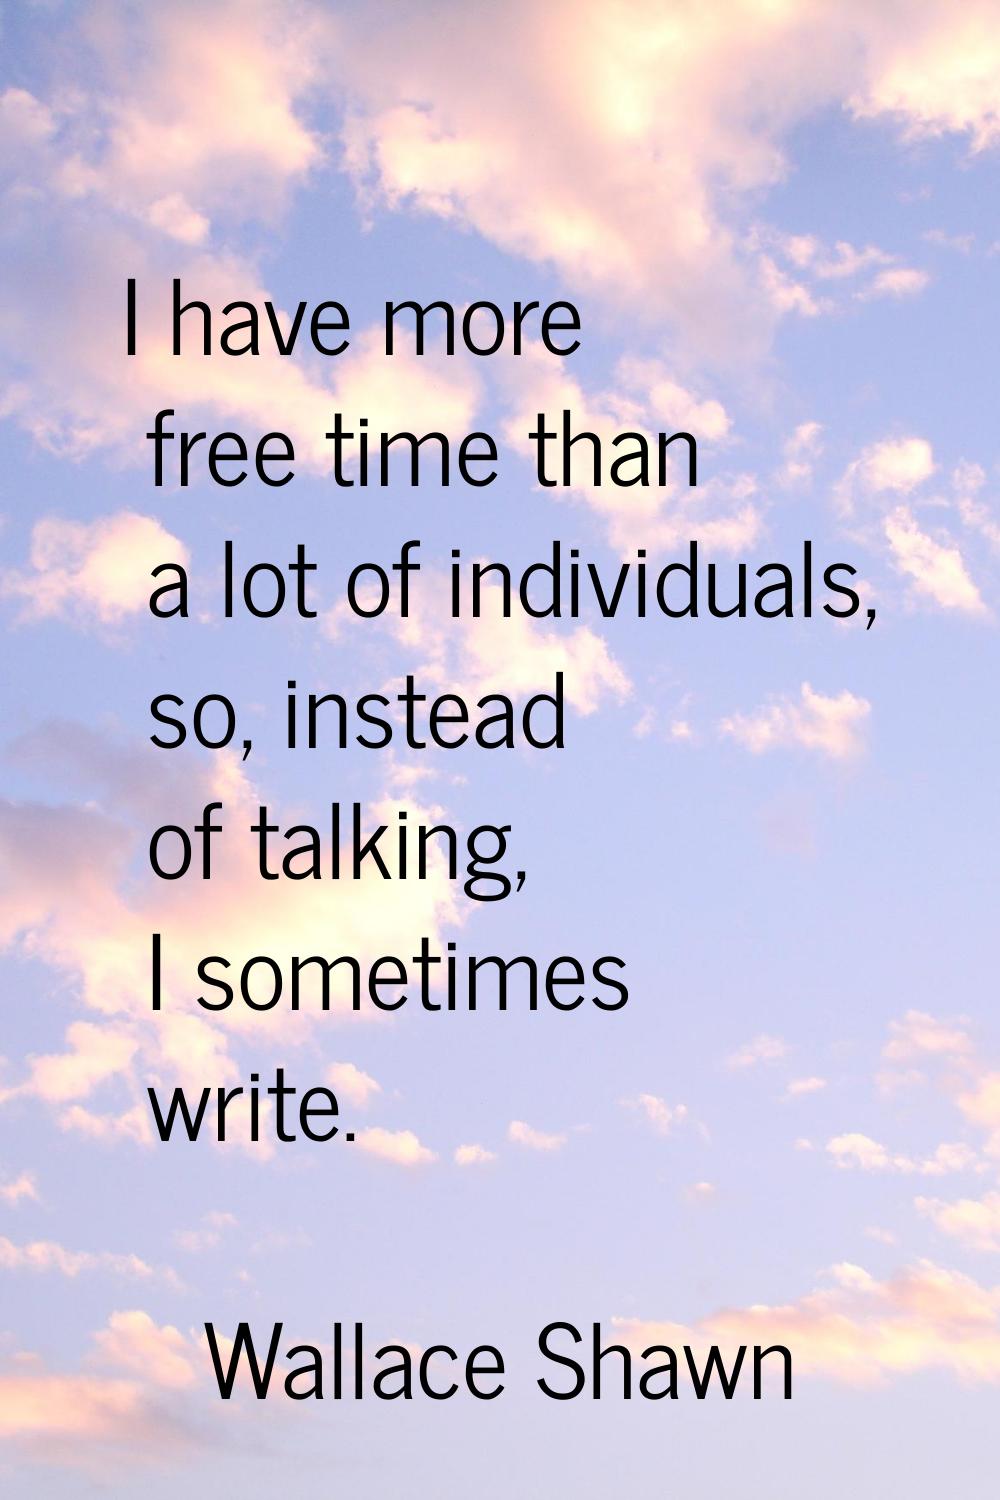 I have more free time than a lot of individuals, so, instead of talking, I sometimes write.